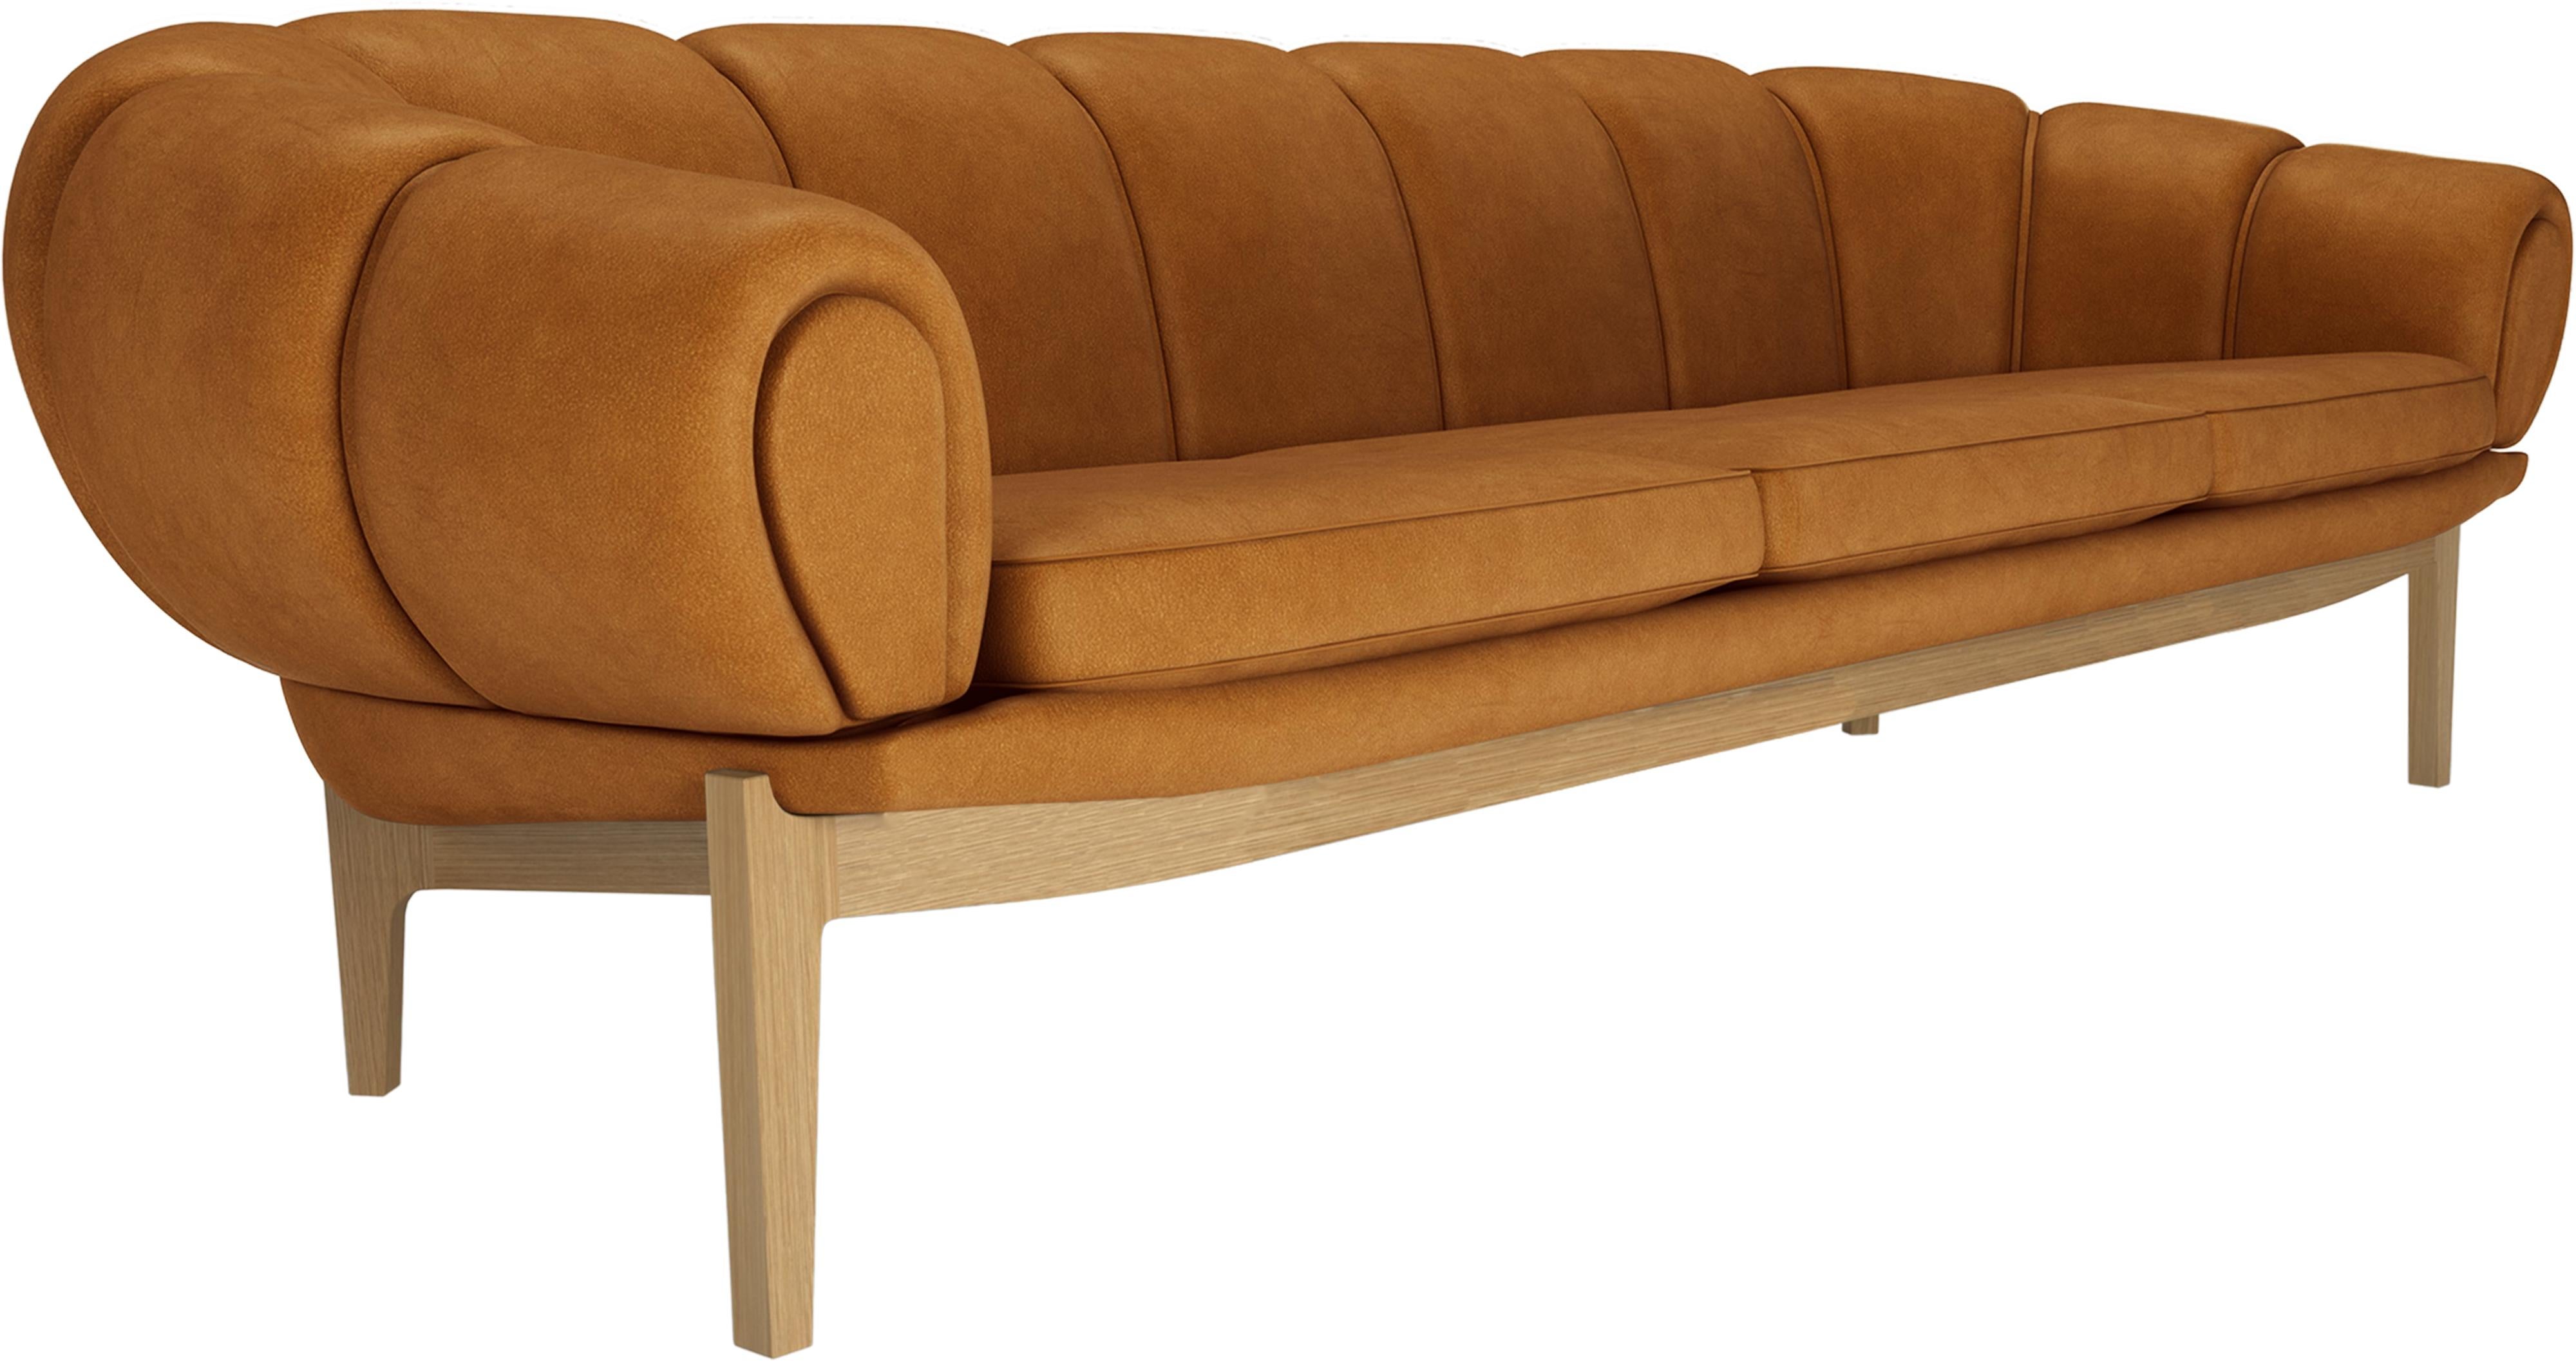 Leather 'Croissant' sofa by Illum Wikkelsø for Gubi with oak Legs.

Playful, voluptuous and expertly crafted, the newly reimagined Croissant collection from Gubi makes a powerful statement in any interior setting and an heirloom to treasure for